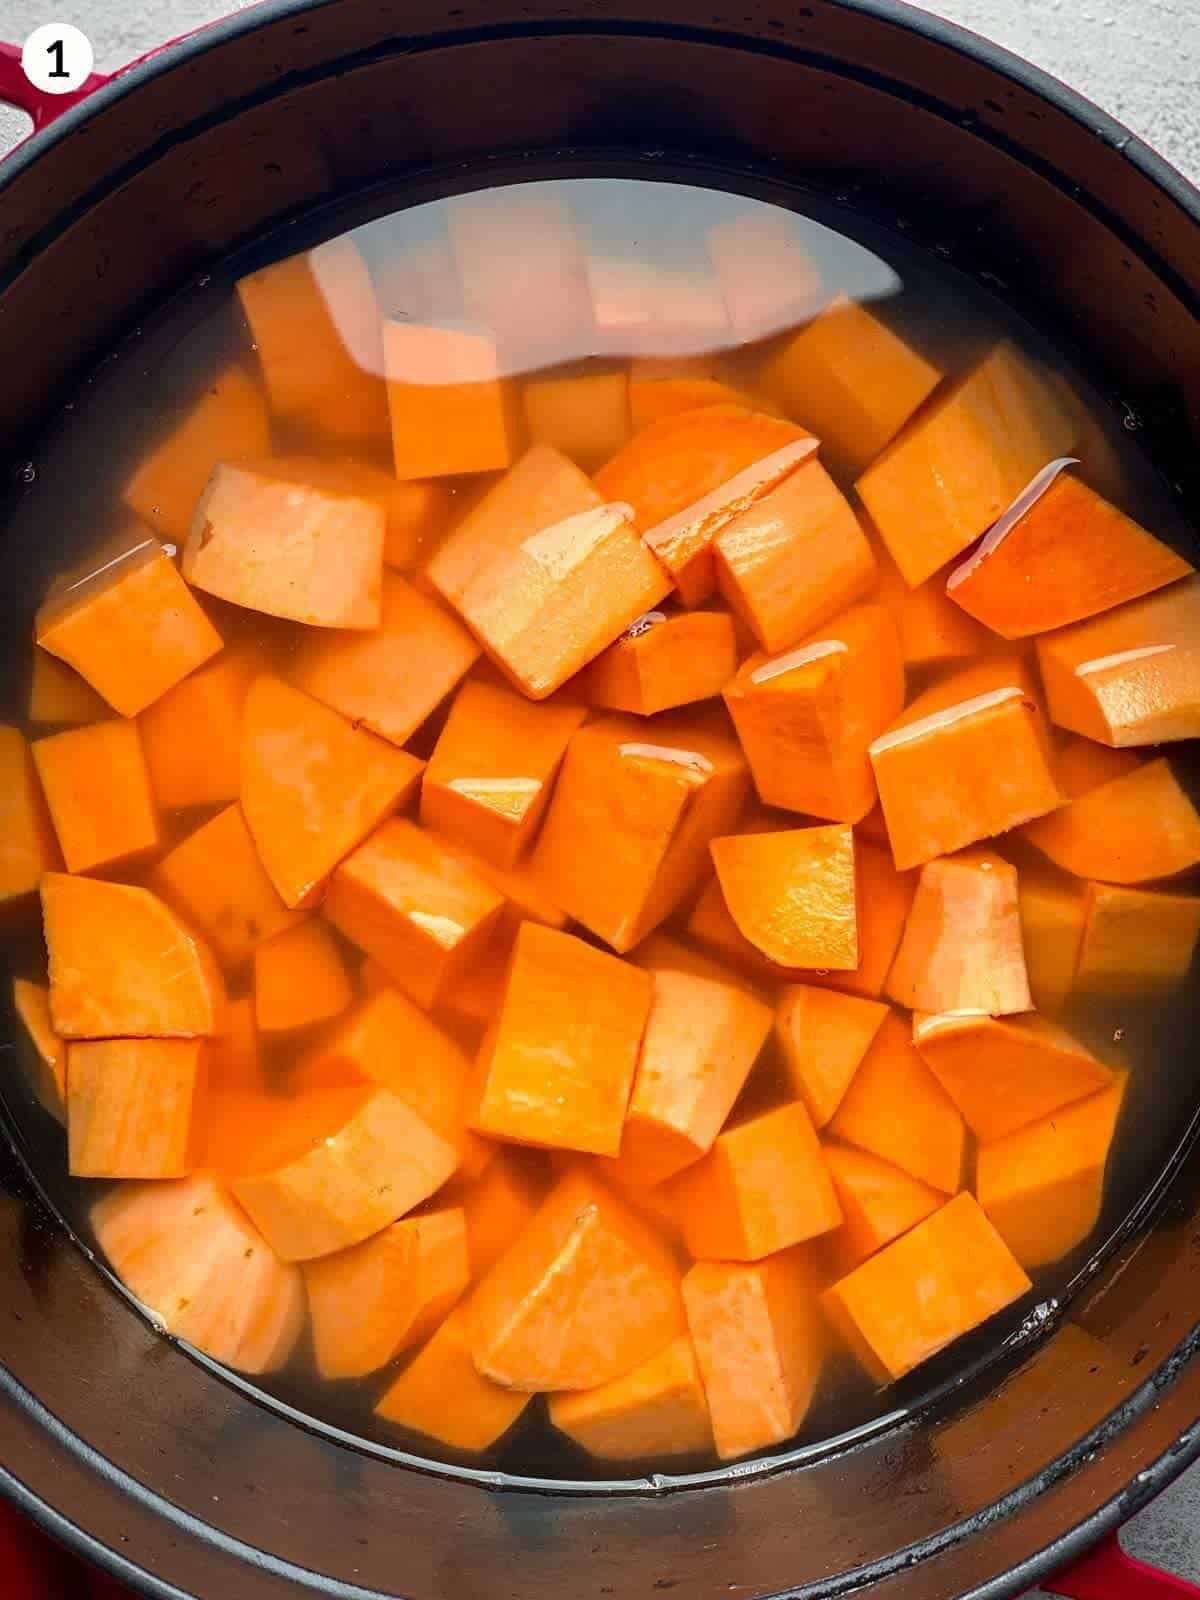 Boiling small pieces of sweet potato in a Dutch oven